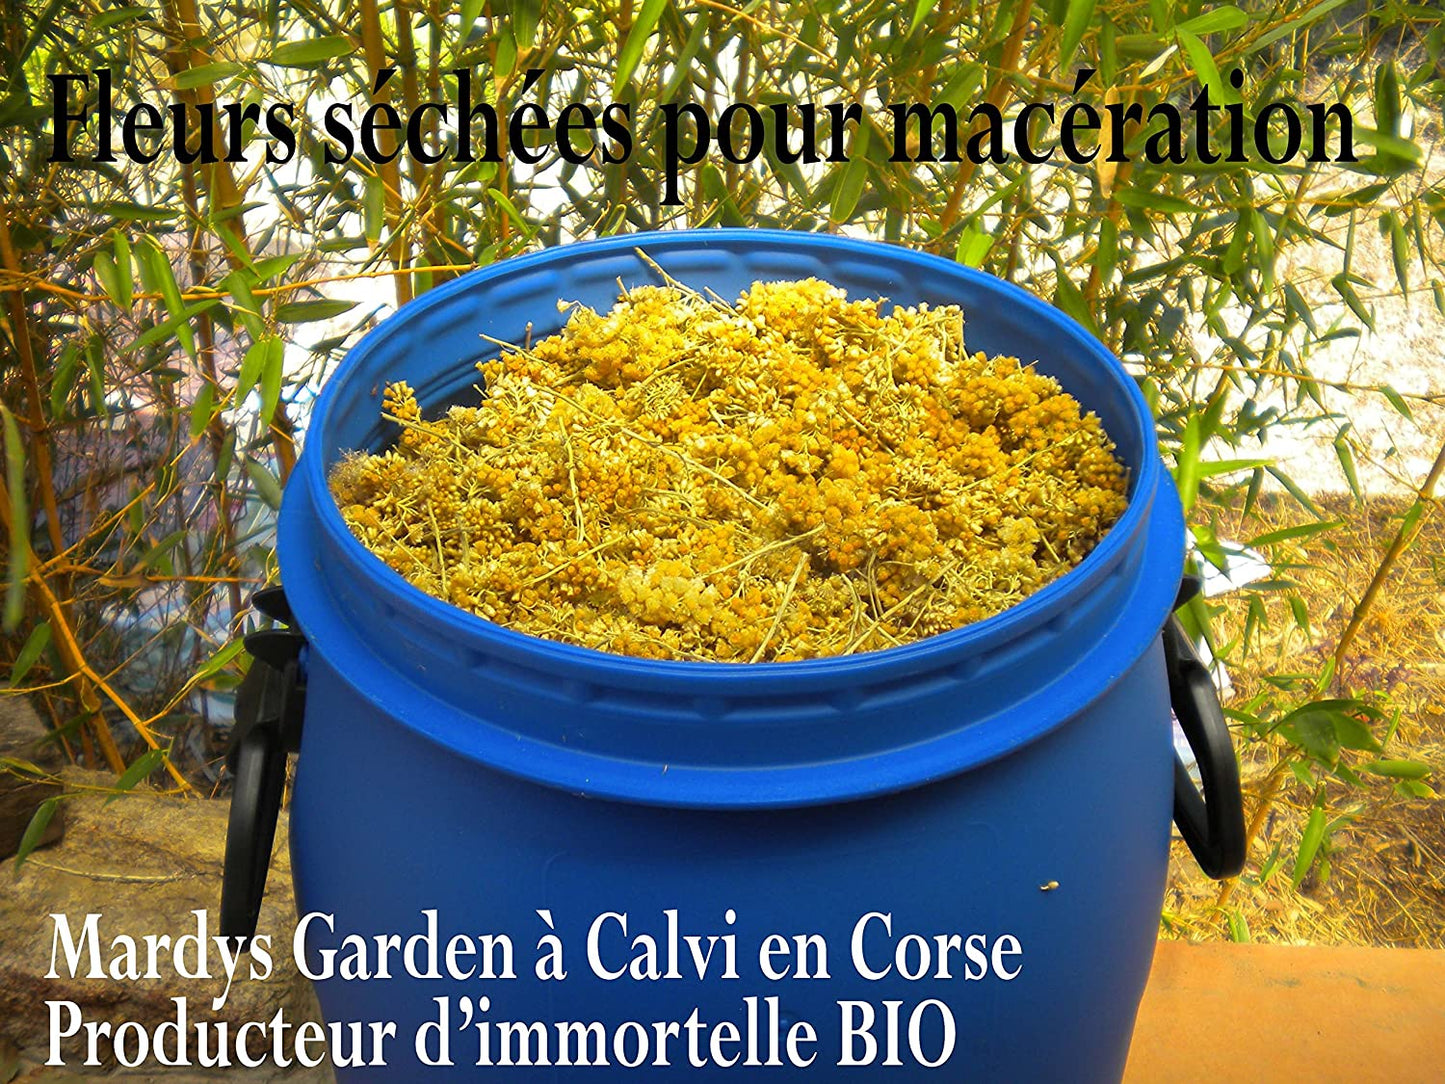 Our Immortelle Oil obtained through solar maceration of the organic Helichrysum flowers is the basis of our soaps. It contains all the properties of Immortelle from Corsica, the strongest Immortelle.  